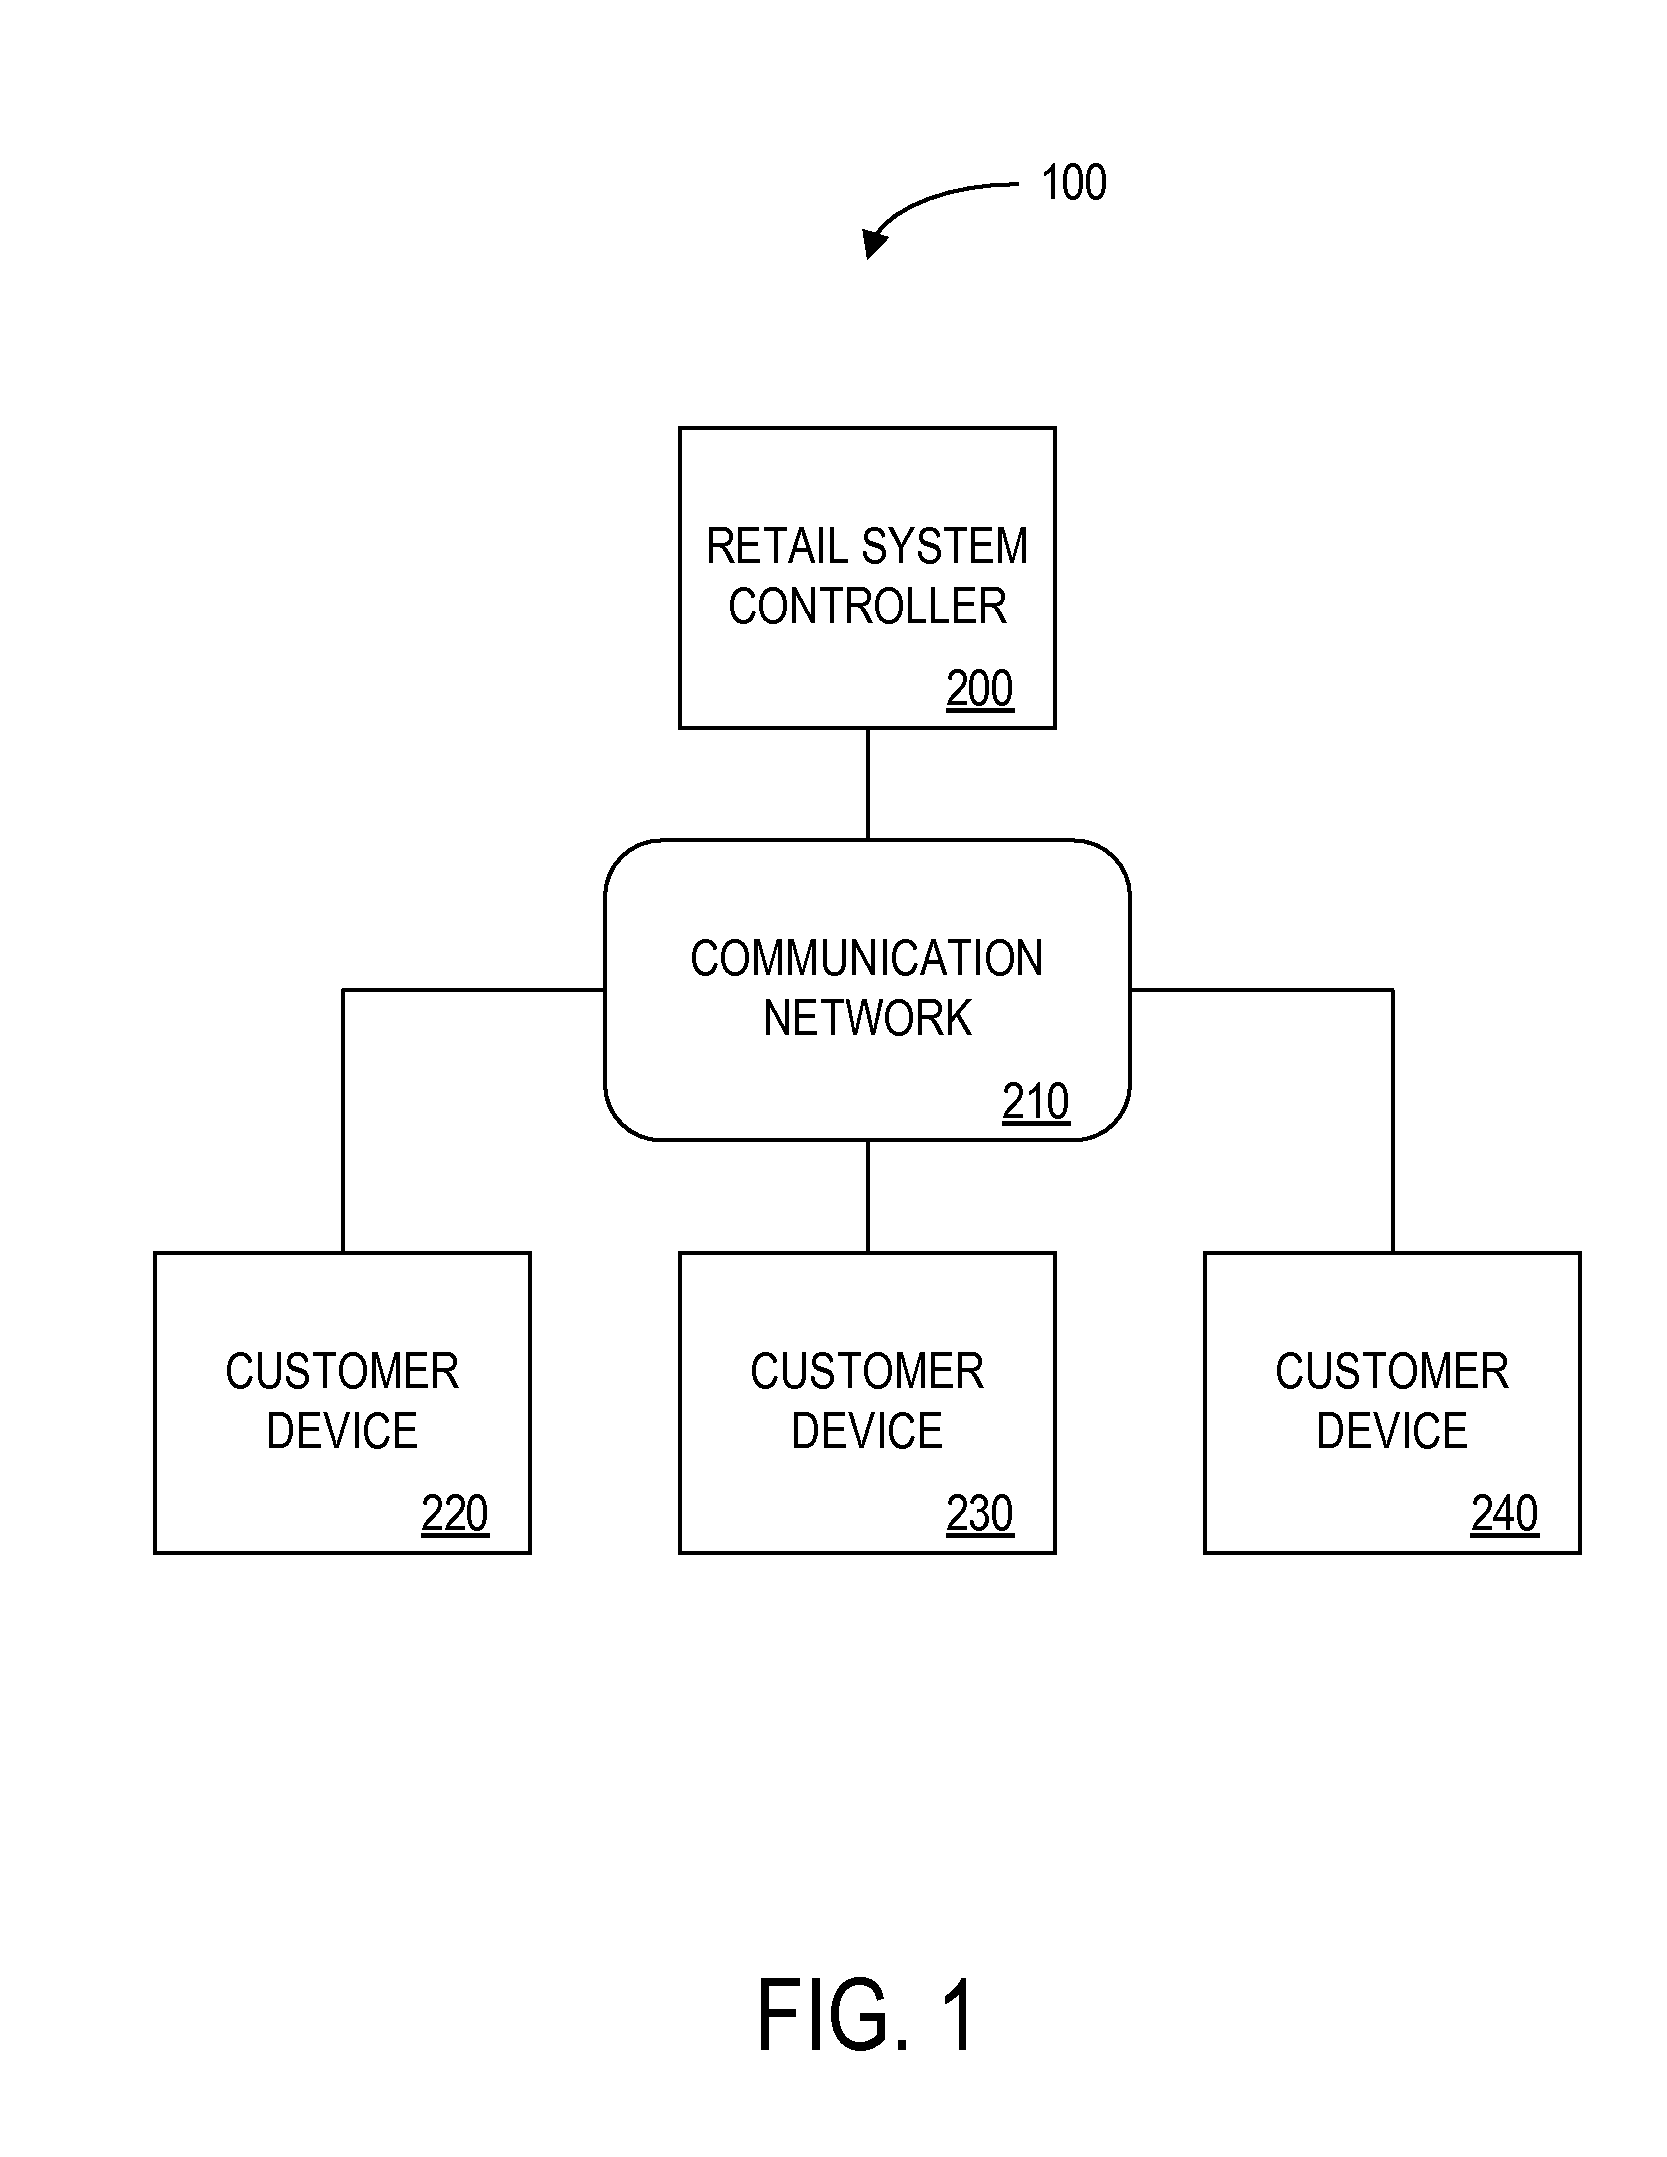 Retail system for selling products based on a flexible product description